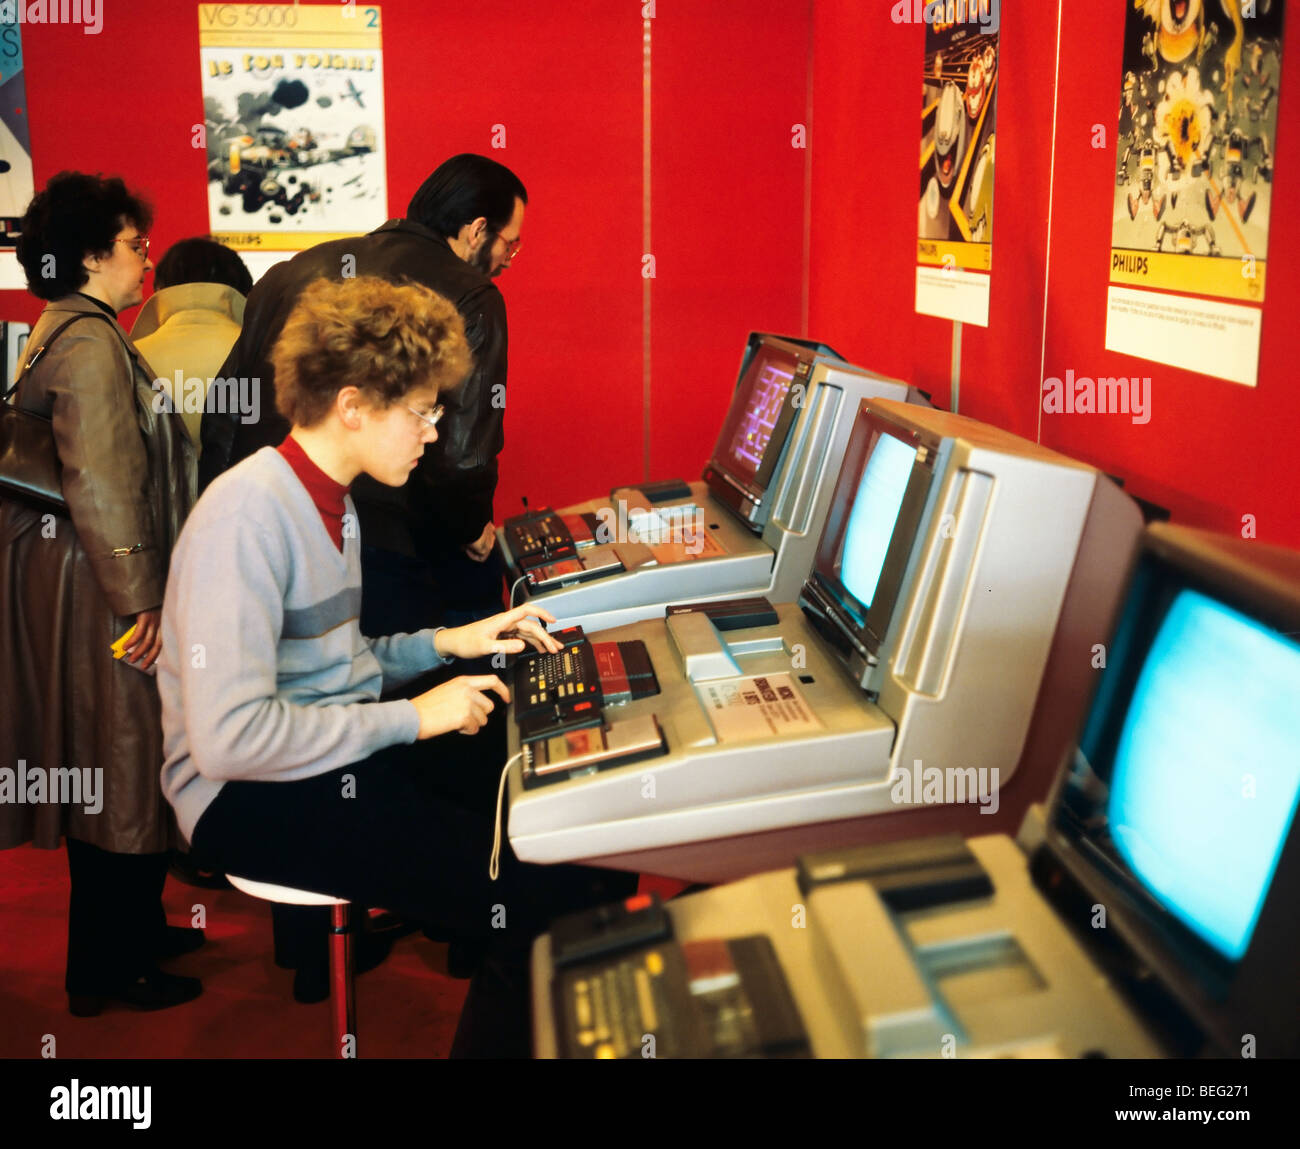 1980s Computer playstations exhibition, teenager boy playing video games at video arcade computer, France, Europe Stock Photo